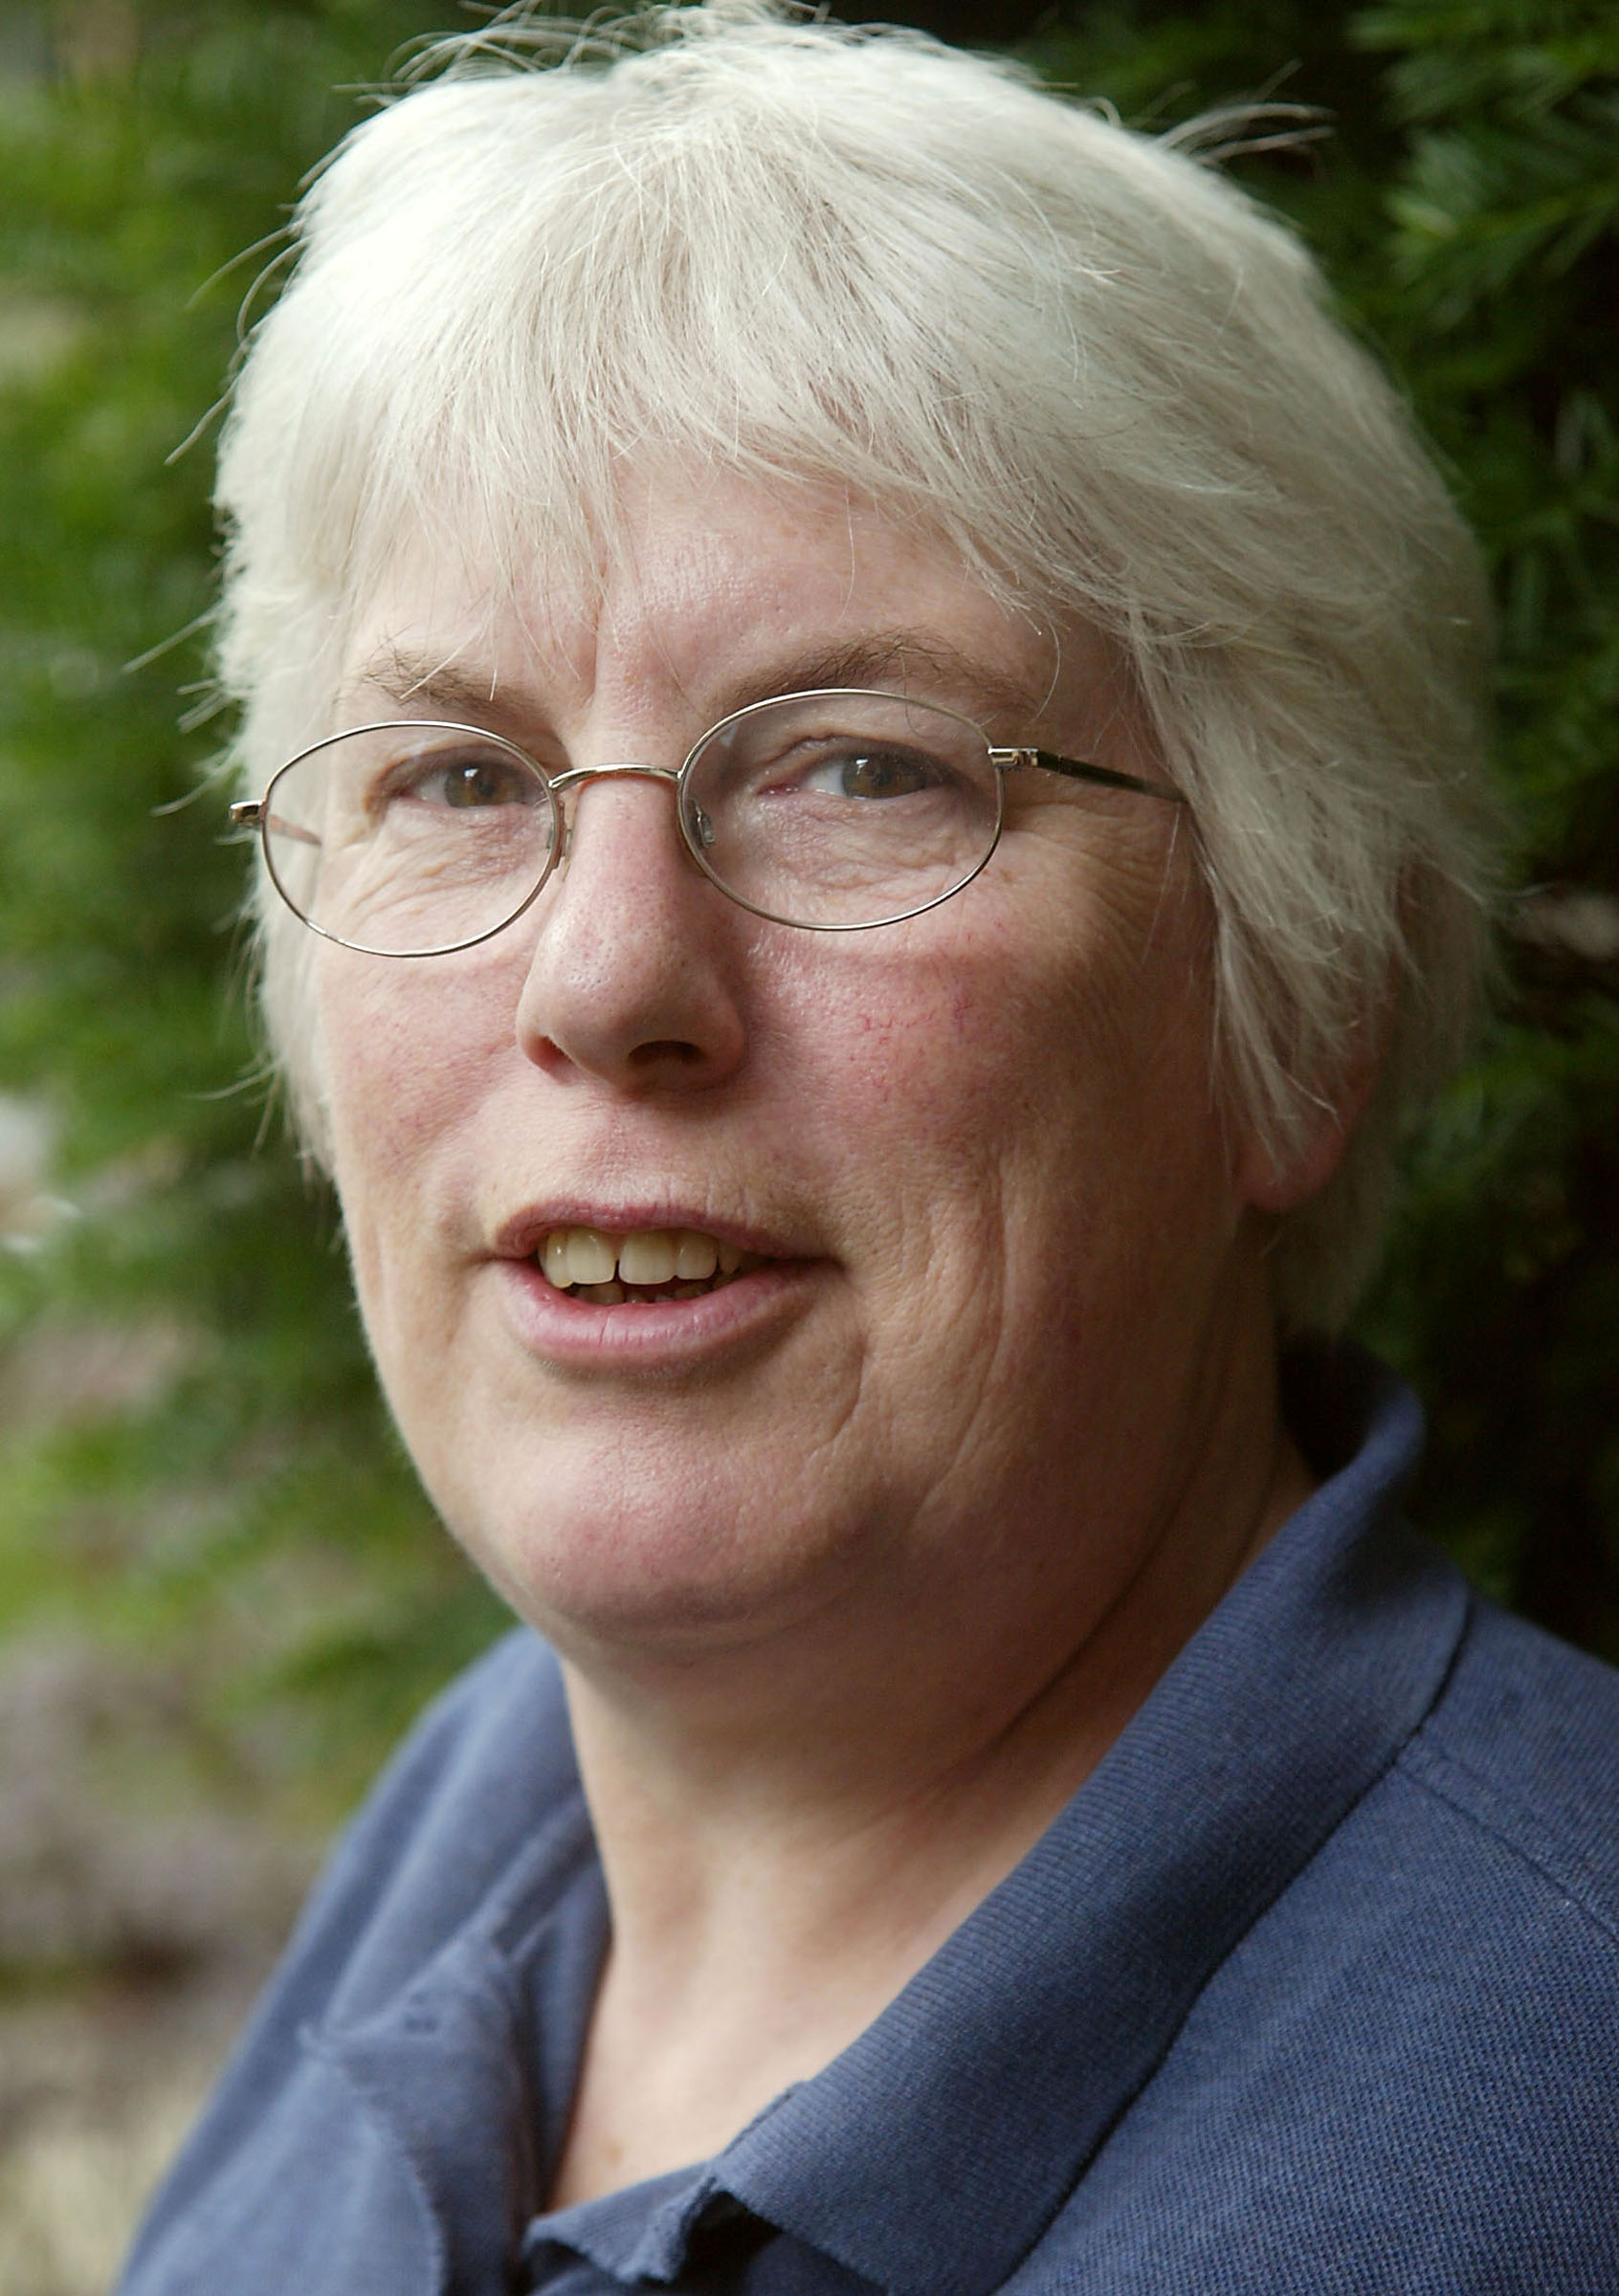 Headshot of Sarah King, an older white woman with short white hair, glasses and a deep blue polo shirt. She is smiling gently